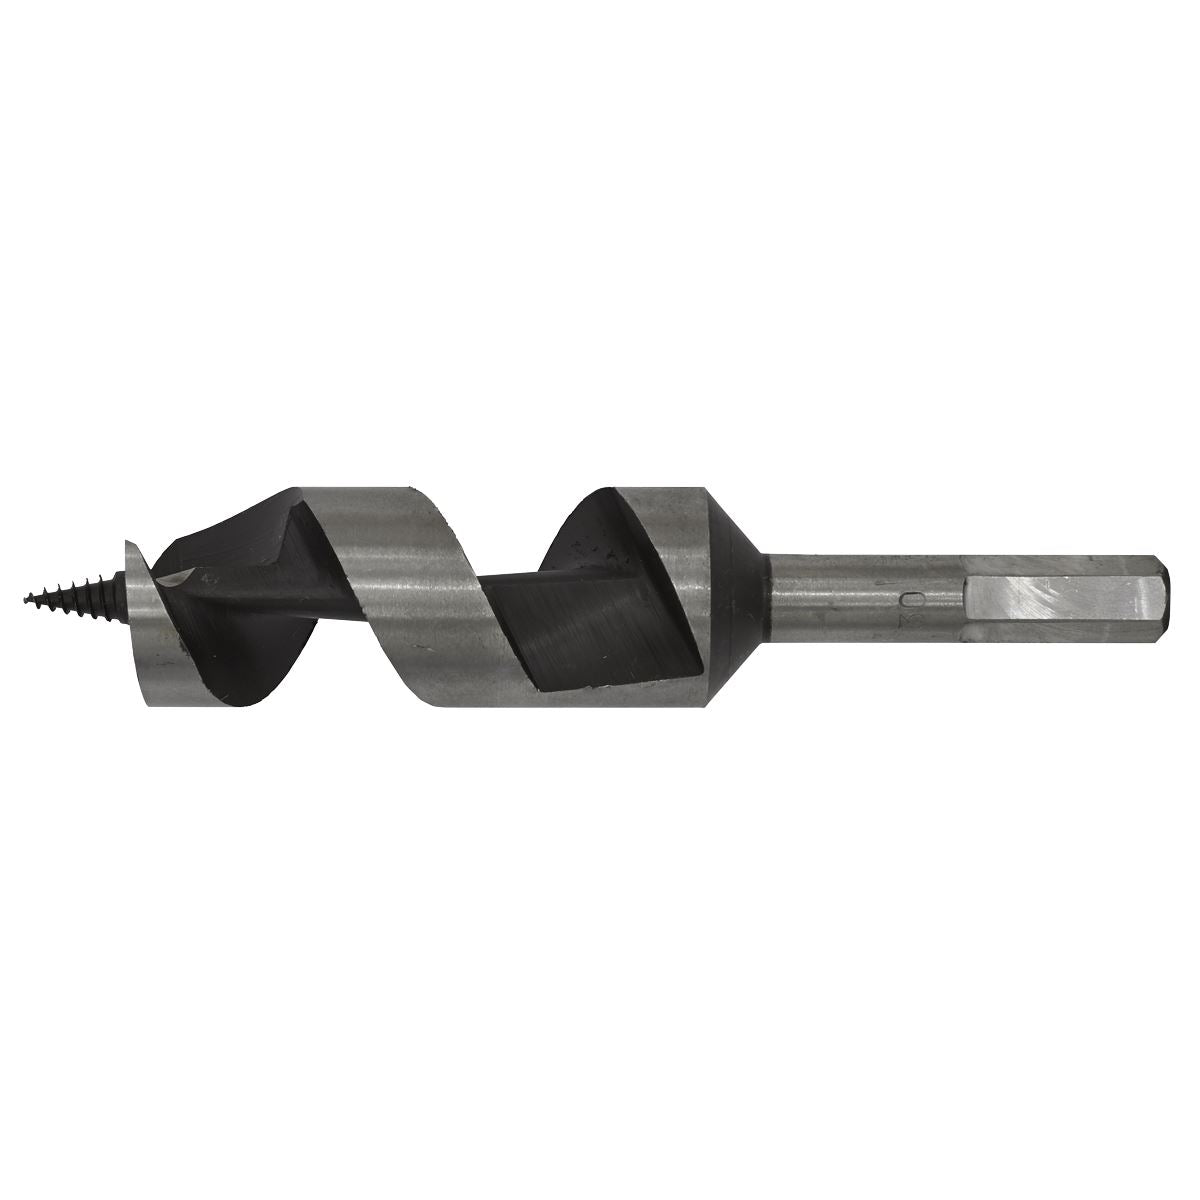 Worksafe by Sealey Auger Wood Drill Bit 30mm x 155mm